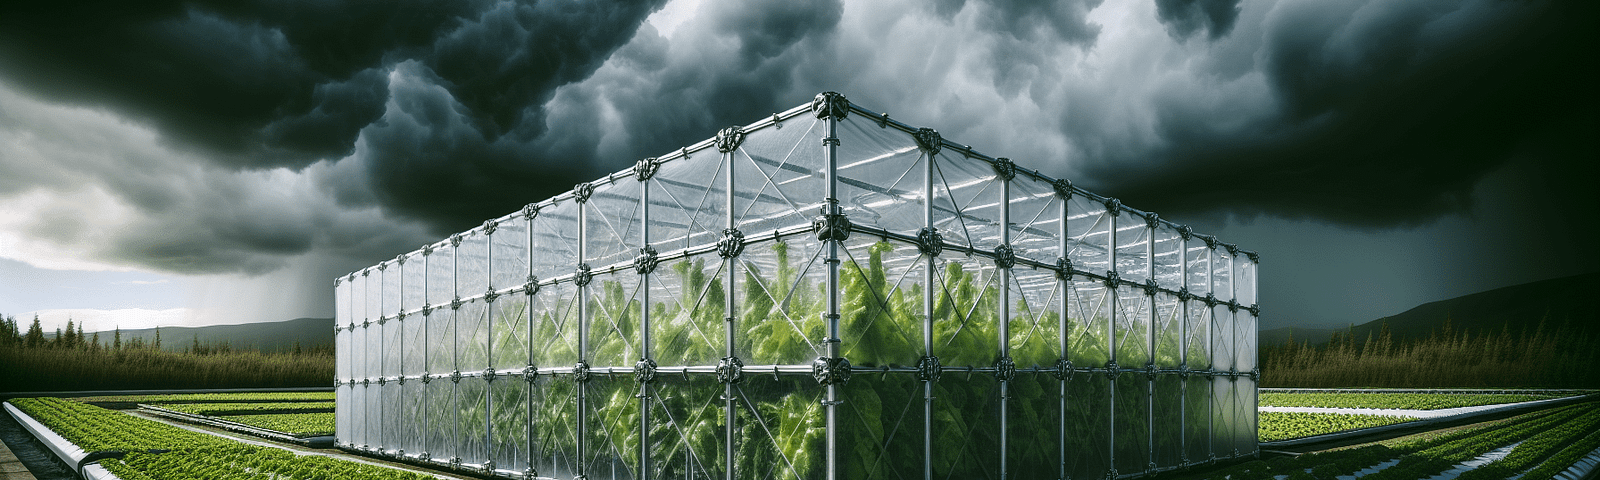 Steps to Secure Your Hydroponic Garden Against Hurricanes